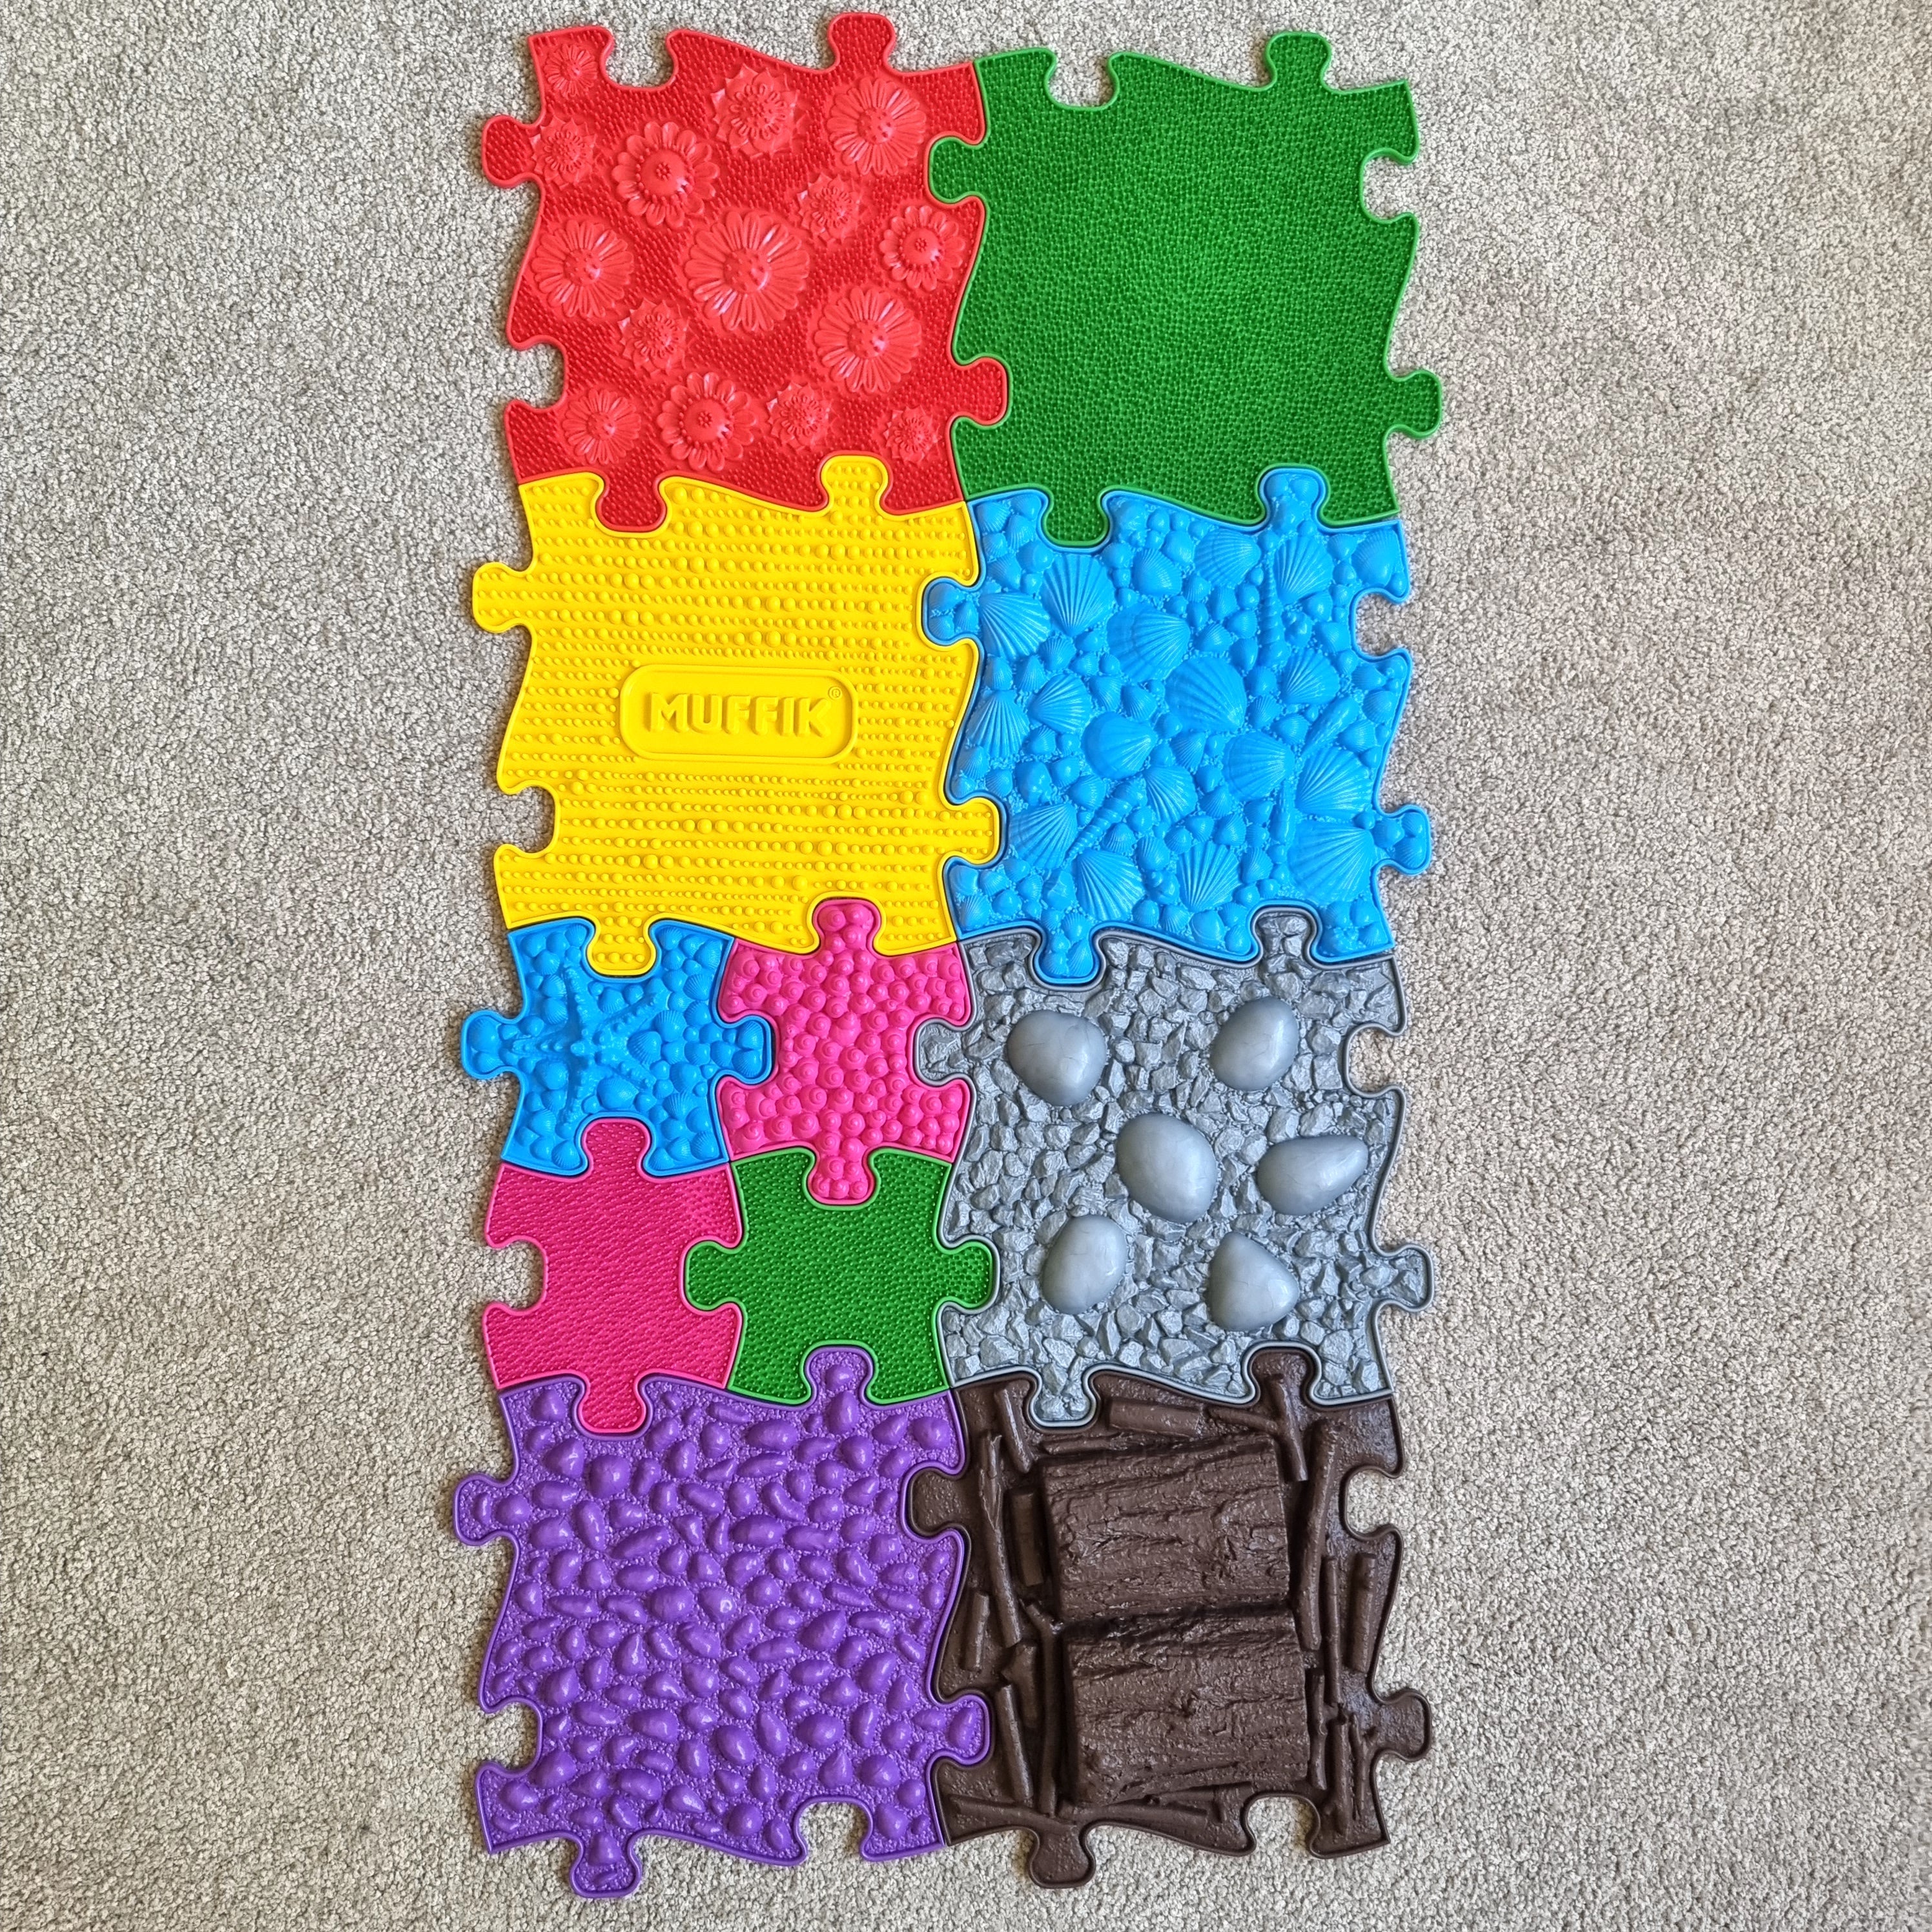 Large sensory play mat for babies, toddlers, kids part 1